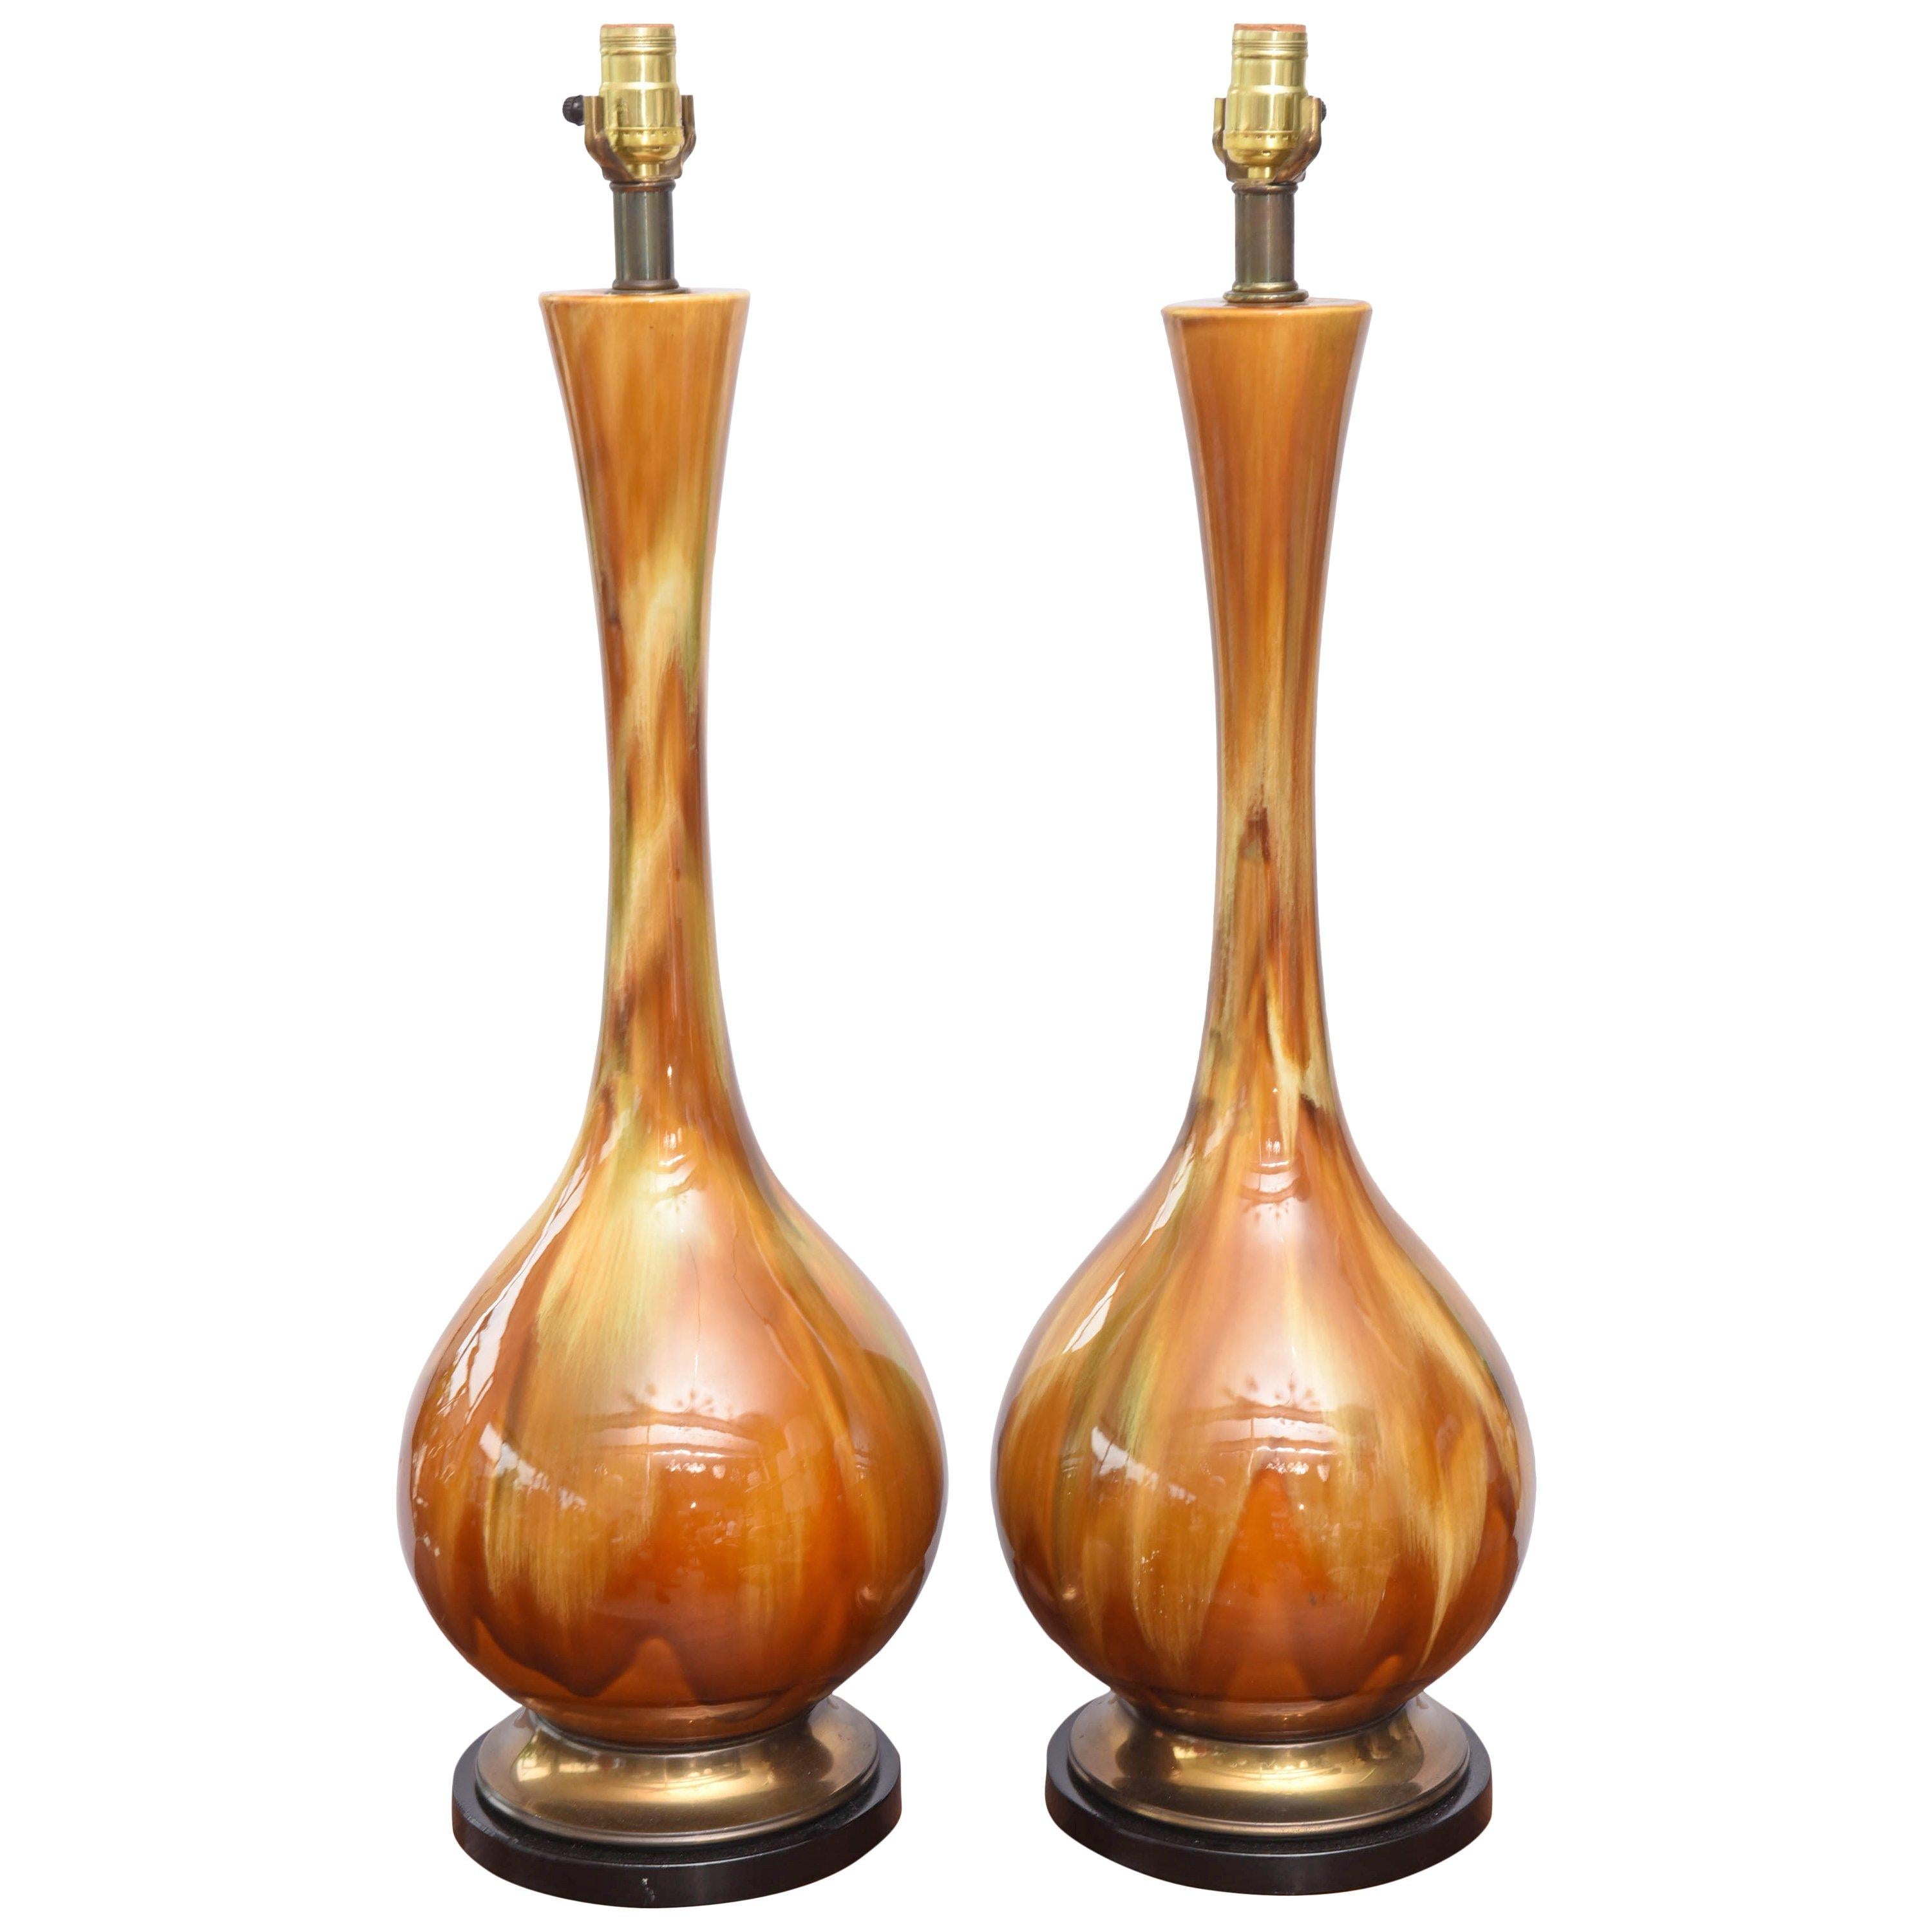 Pair of Monumental Amber Drip Glaze Table Lamps, 1950s USA